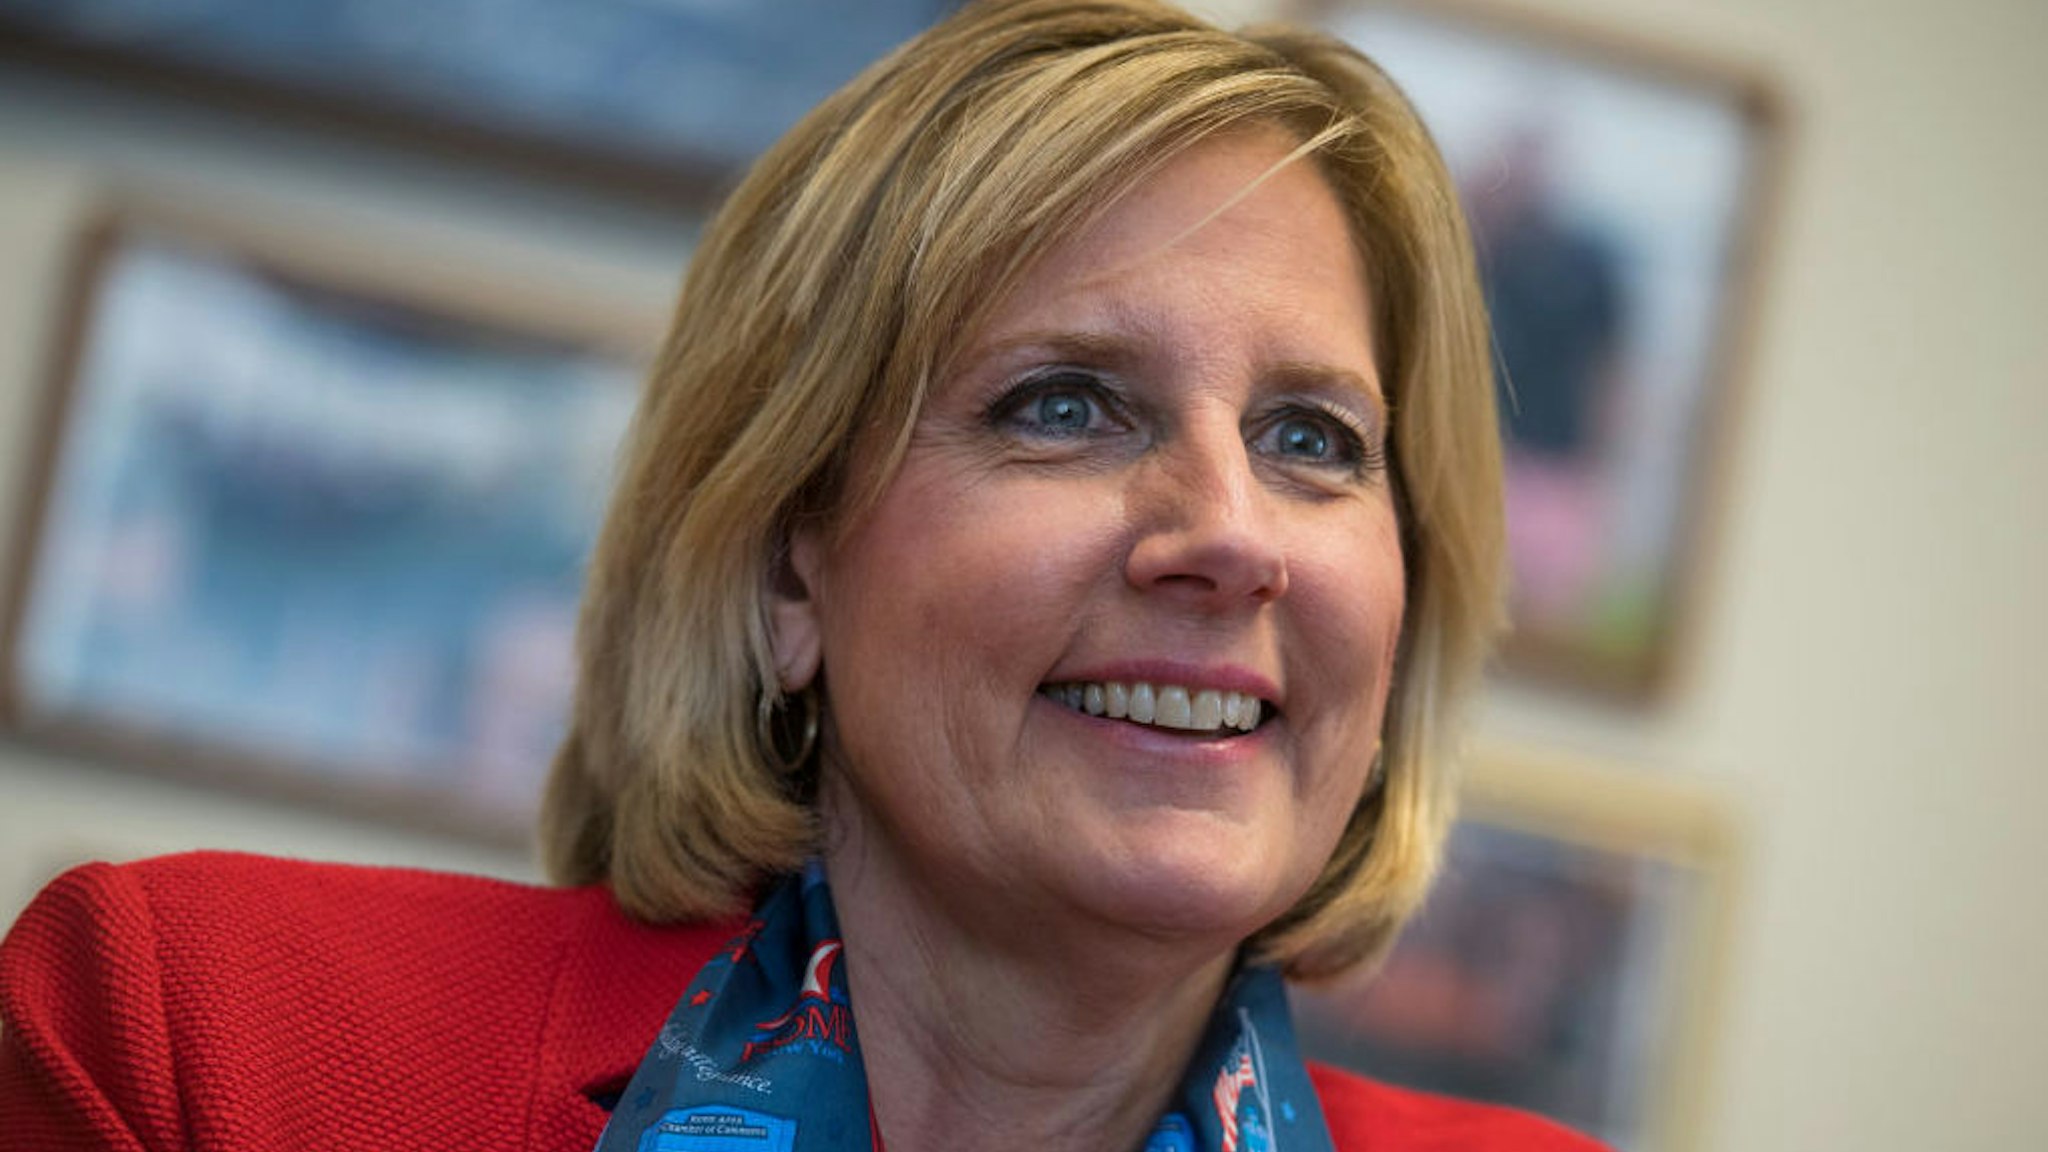 UNITED STATES - MARCH 07: Rep. Claudia Tenney, R-N.Y., is interviewed in her Cannon Building office on March 07, 2018.